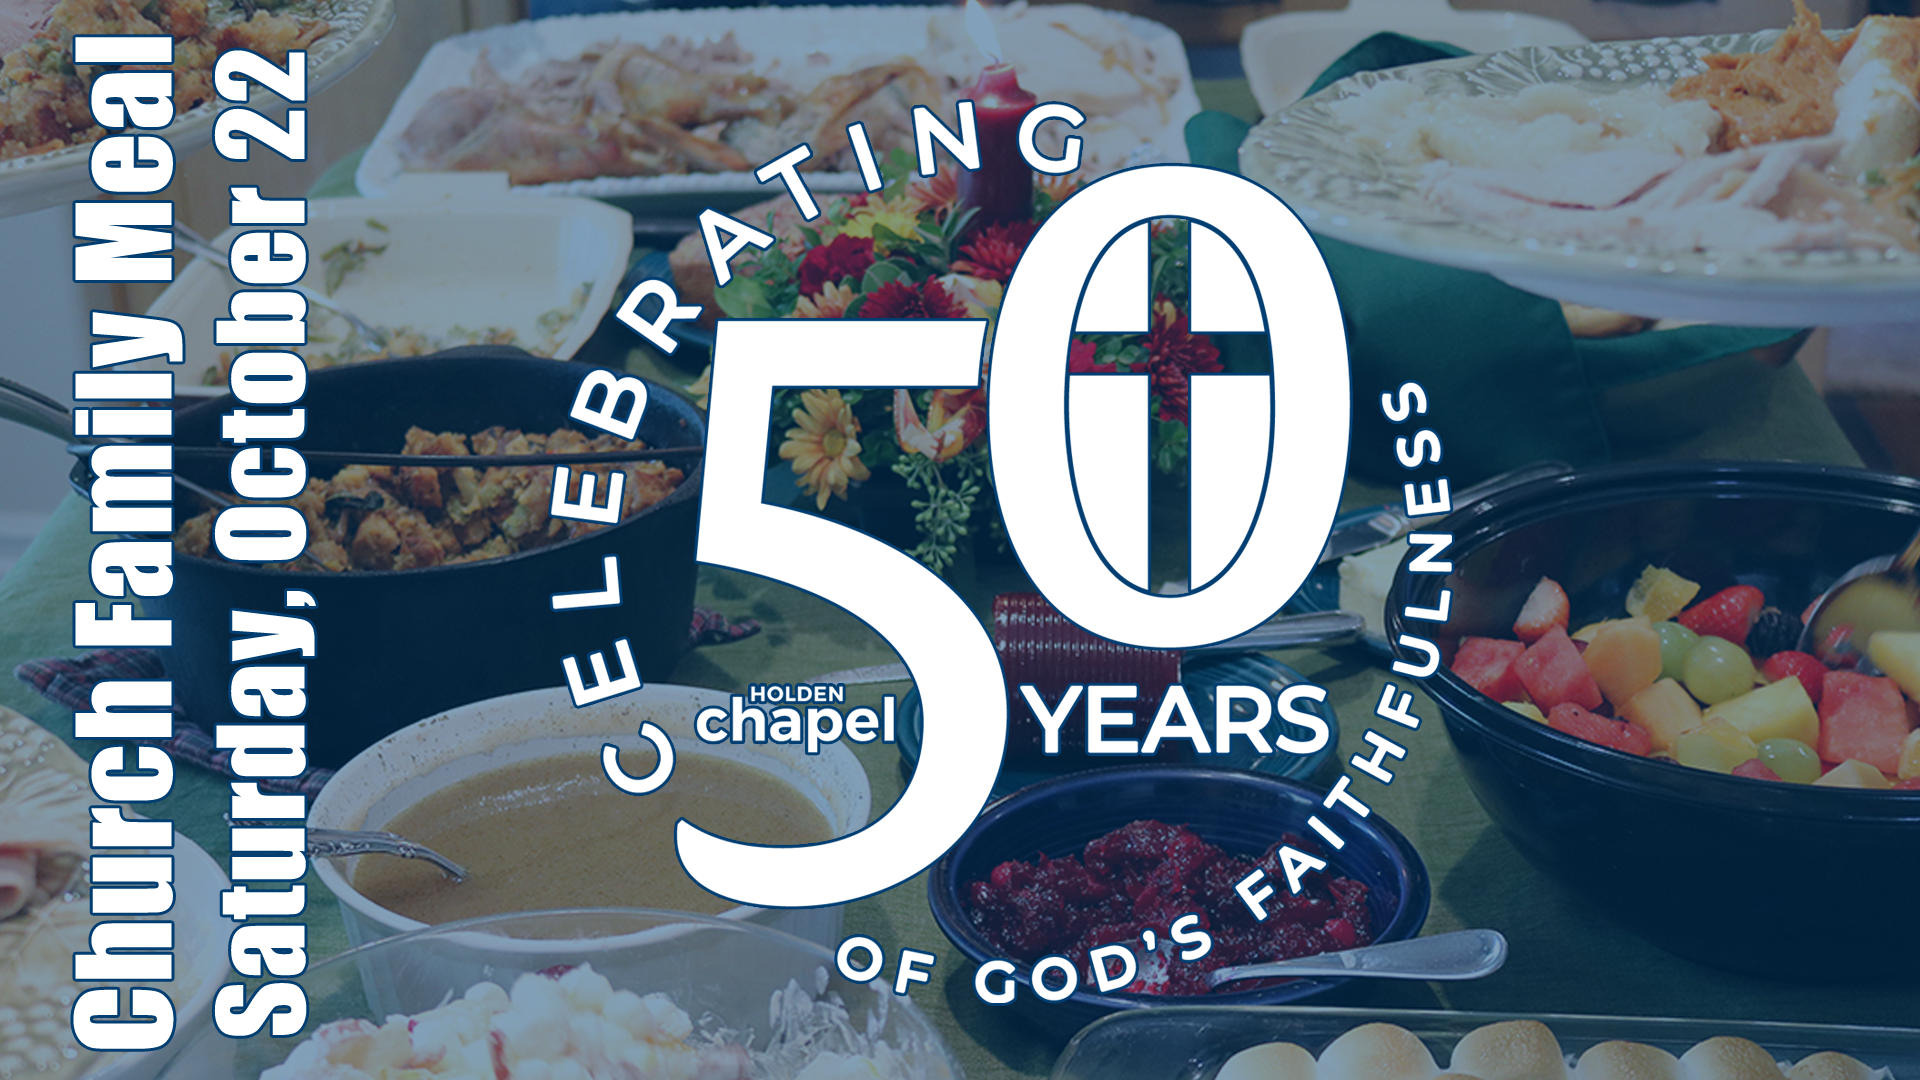 3-50th anniversary - family meal image